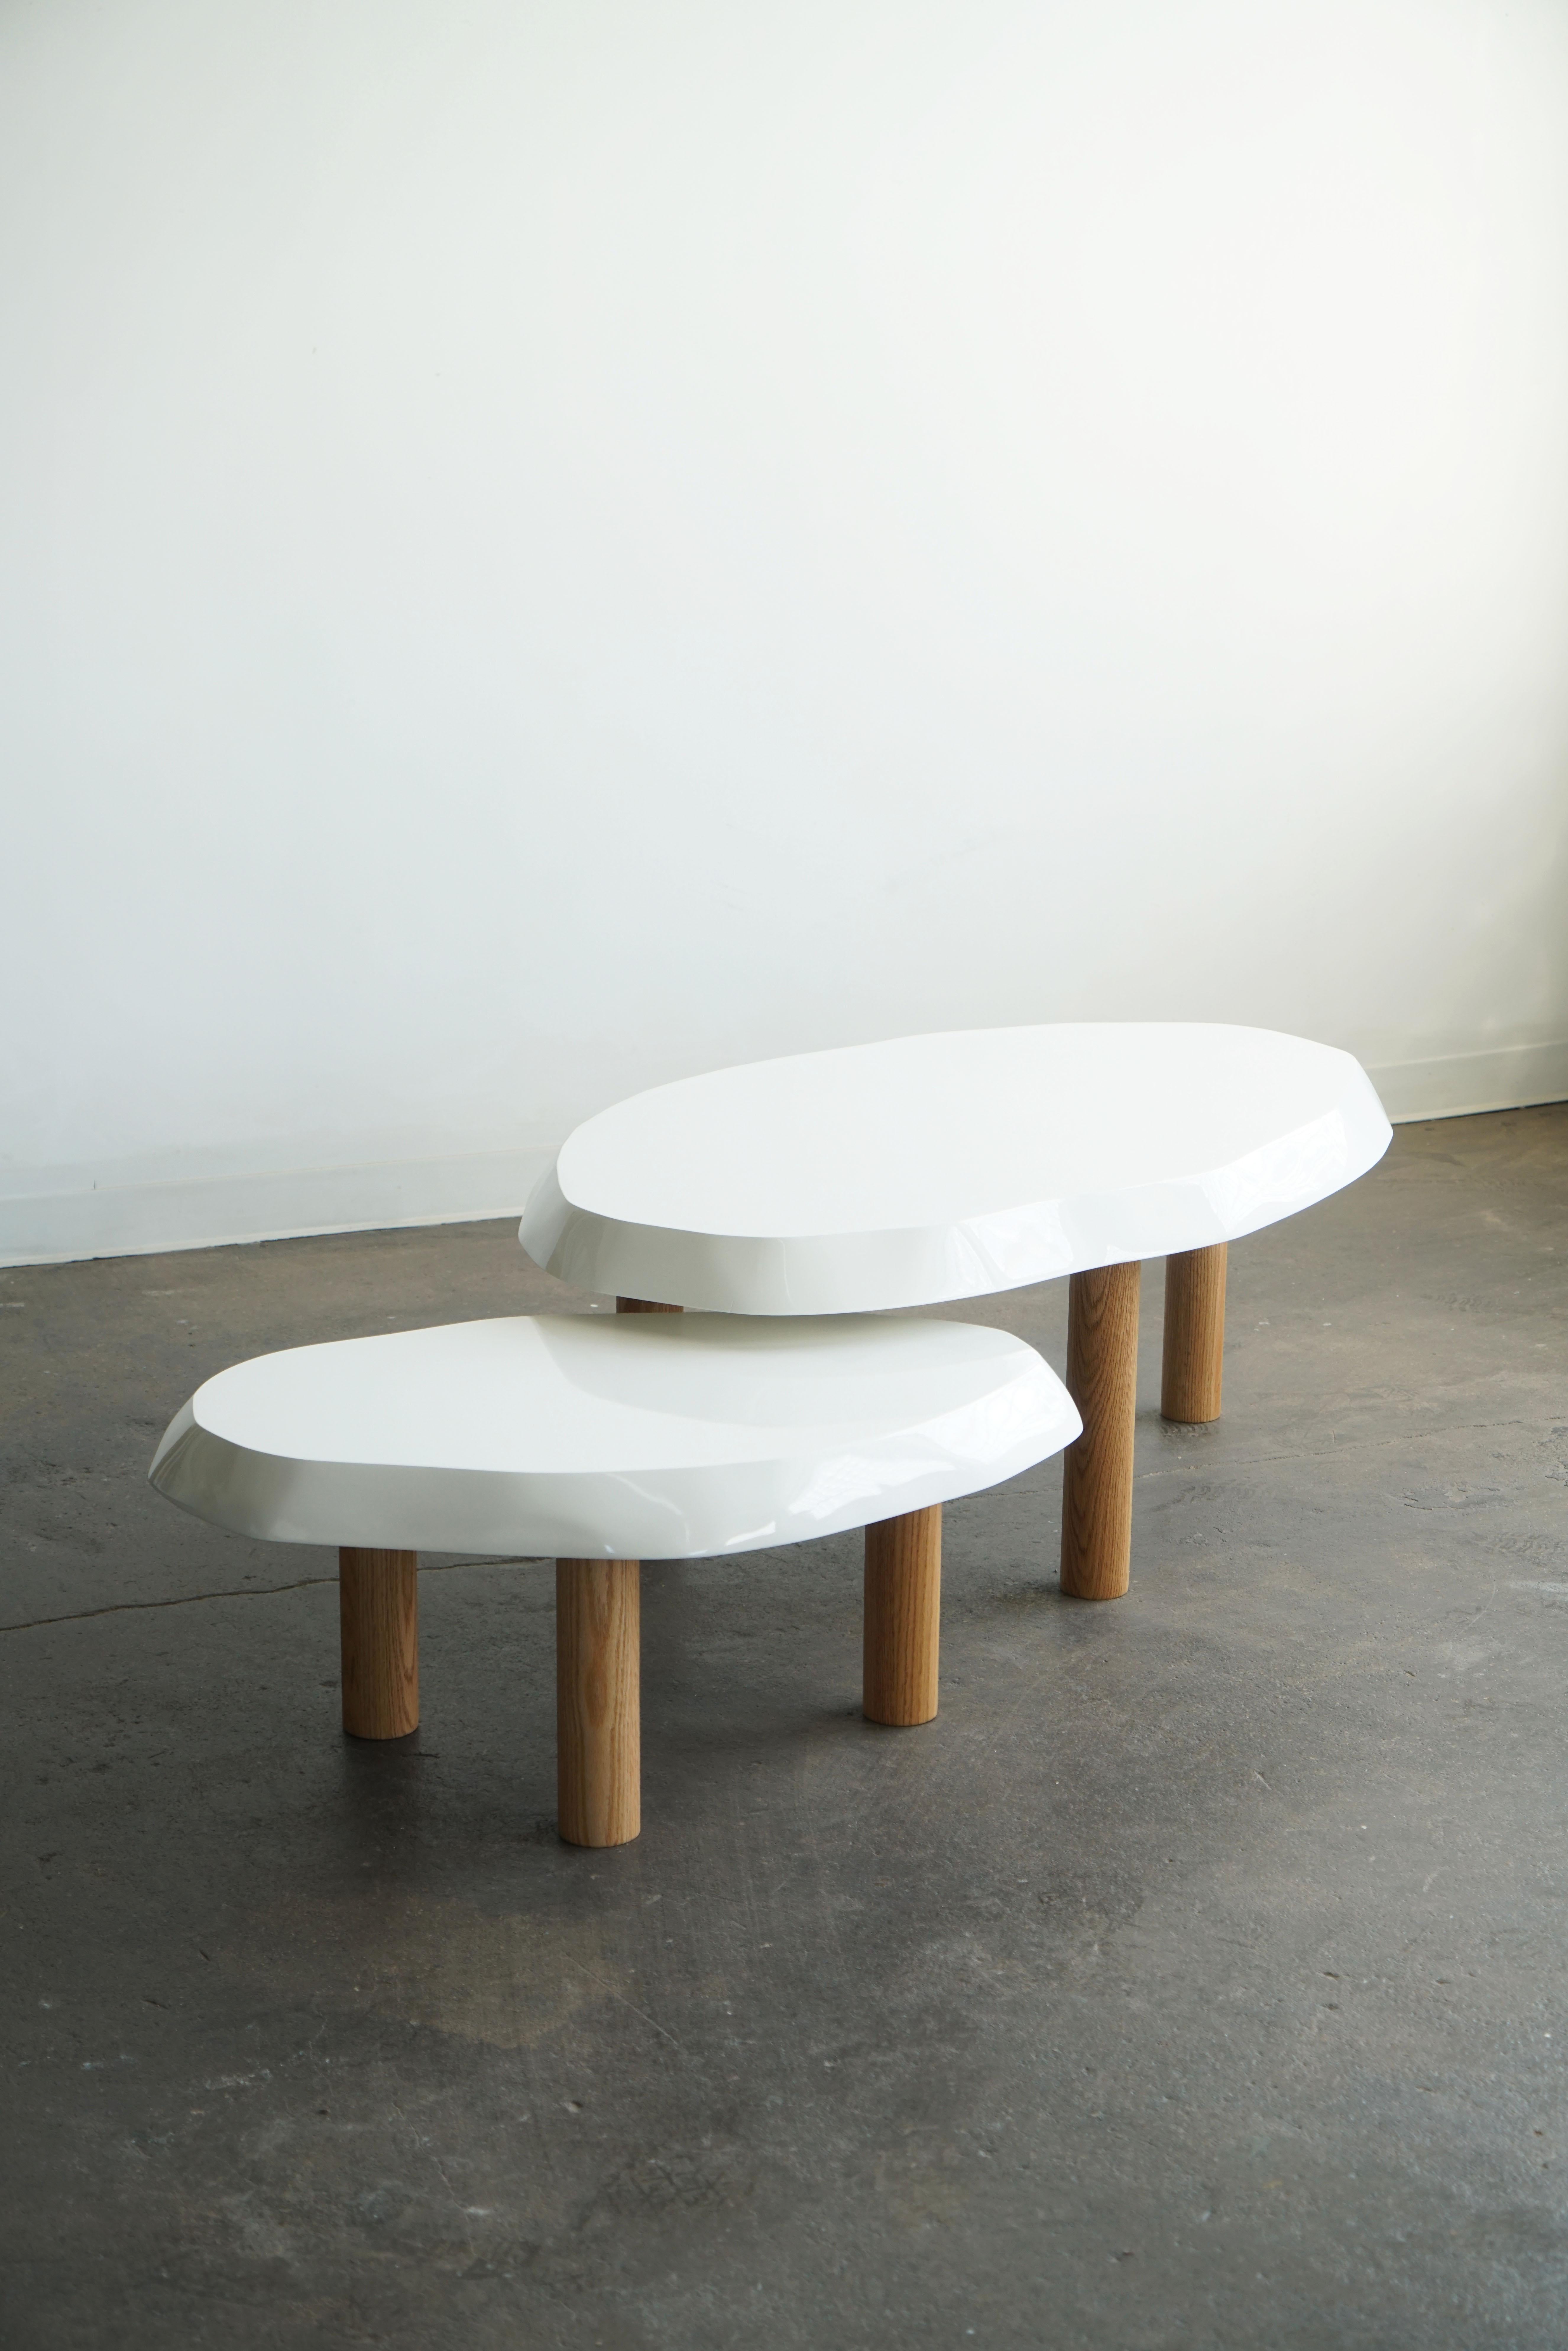 Organic shaped coffee table by Last Workshop, 2023 
Hand shaped tops are made from solid wood.
Solid oak legs, natural finish. 

Dimensions:
Table one: 53